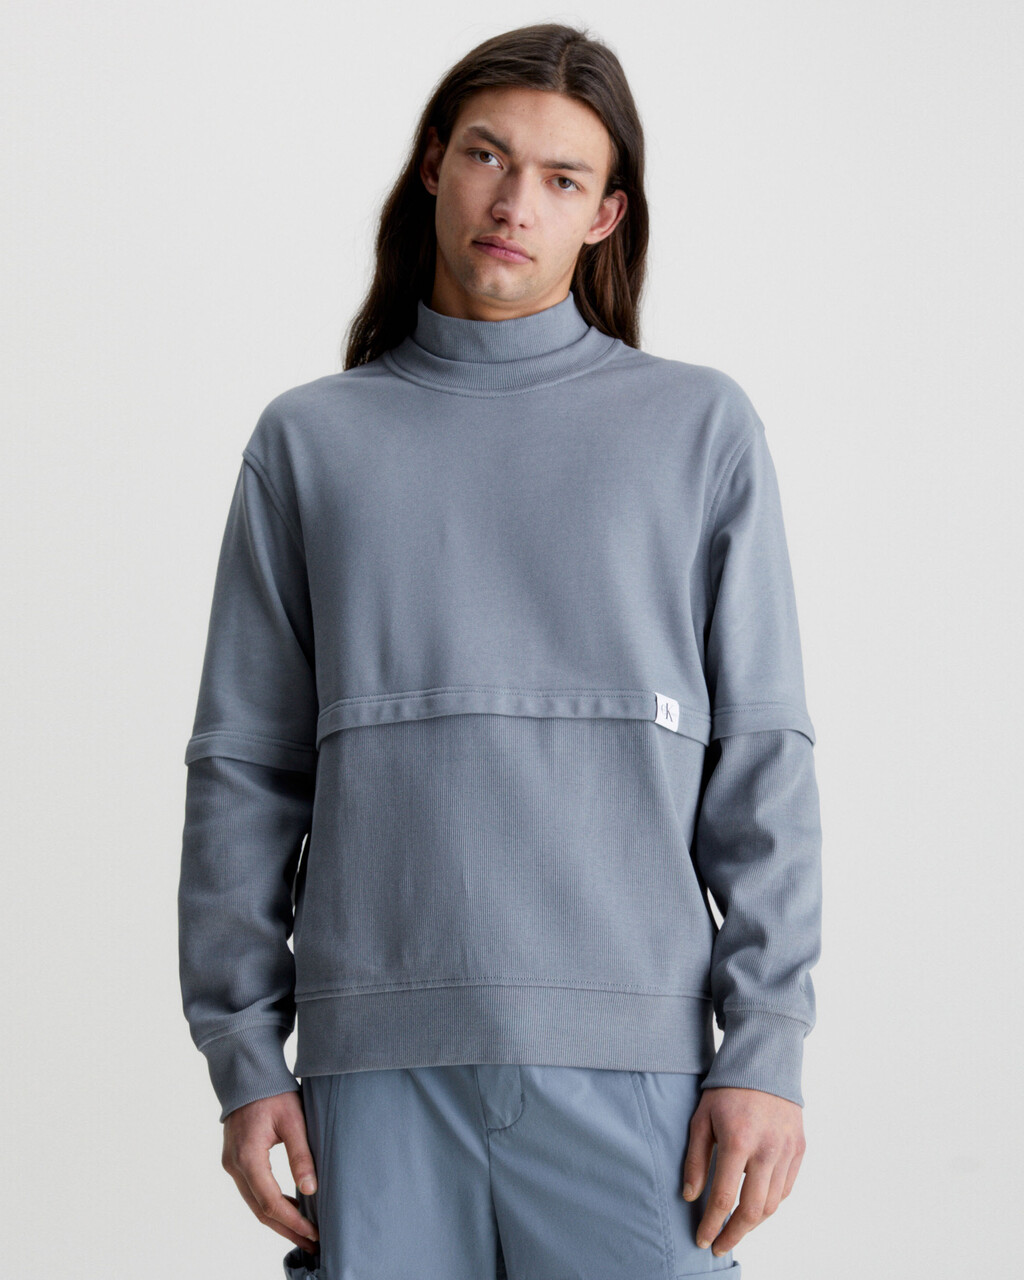 RELAXED MATERIAL MIX SWEATSHIRT, Overcast Grey, hi-res